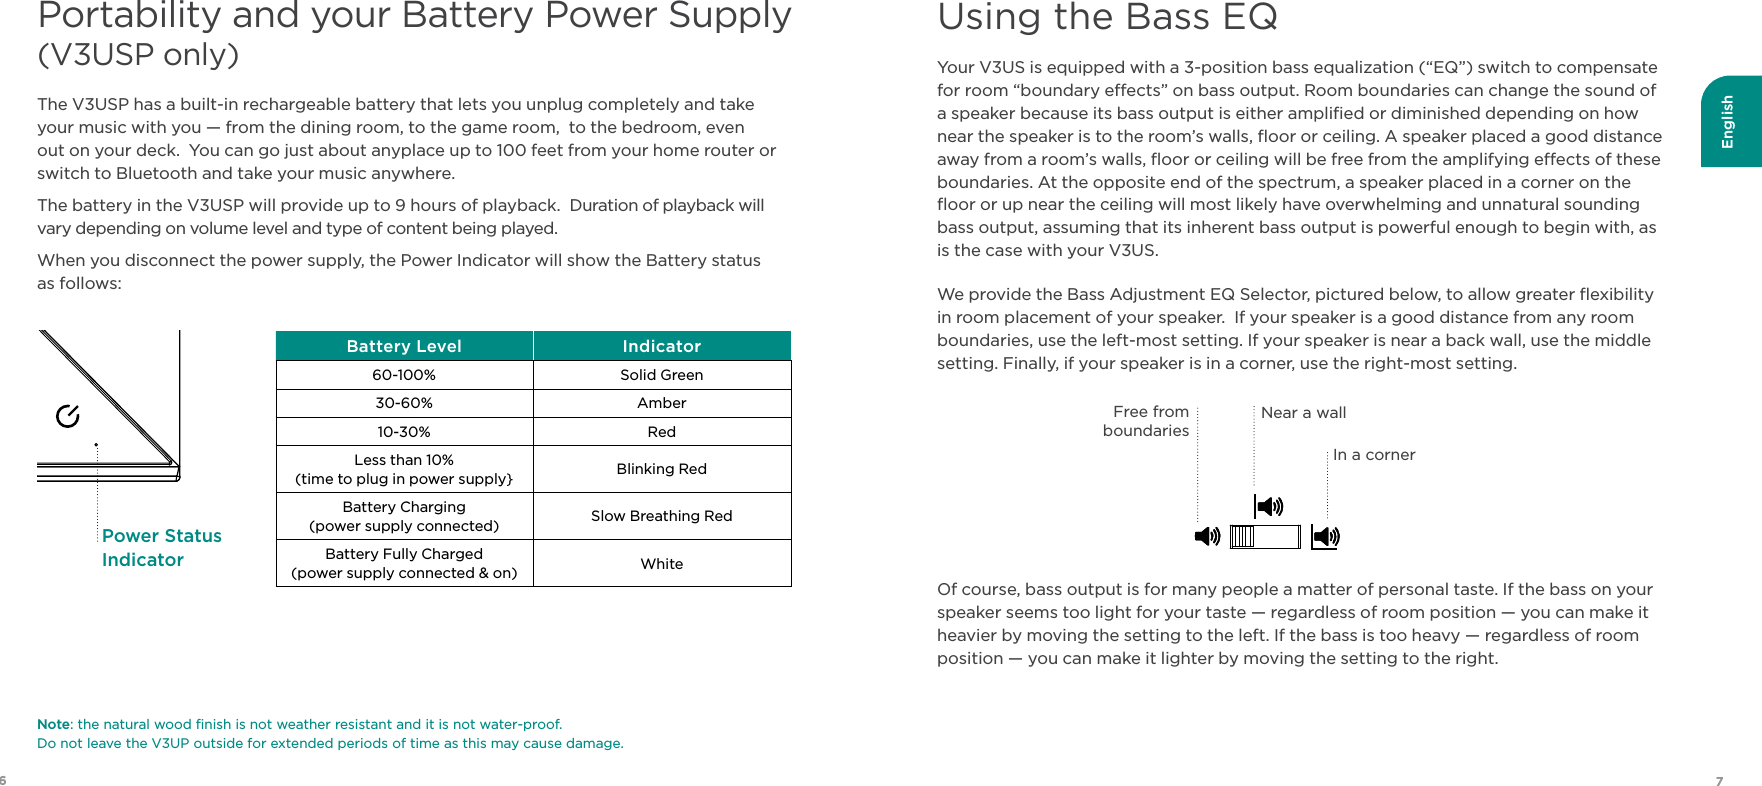 English76Portability and your Battery Power Supply  (V3USP only) Your V3US is equipped with a 3-position bass equalization (“EQ”) switch to compensate for room “boundary eects” on bass output. Room boundaries can change the sound of a speaker because its bass output is either ampliﬁed or diminished depending on how near the speaker is to the room’s walls, ﬂoor or ceiling. A speaker placed a good distance away from a room’s walls, ﬂoor or ceiling will be free from the amplifying eects of these boundaries. At the opposite end of the spectrum, a speaker placed in a corner on the ﬂoor or up near the ceiling will most likely have overwhelming and unnatural sounding bass output, assuming that its inherent bass output is powerful enough to begin with, as is the case with your V3US.We provide the Bass Adjustment EQ Selector, pictured below, to allow greater ﬂexibility in room placement of your speaker.  If your speaker is a good distance from any room boundaries, use the left-most setting. If your speaker is near a back wall, use the middle setting. Finally, if your speaker is in a corner, use the right-most setting. Of course, bass output is for many people a matter of personal taste. If the bass on your speaker seems too light for your taste — regardless of room position — you can make it heavier by moving the setting to the left. If the bass is too heavy — regardless of room position — you can make it lighter by moving the setting to the right.The V3USP has a built-in rechargeable battery that lets you unplug completely and take your music with you — from the dining room, to the game room,  to the bedroom, even out on your deck.  You can go just about anyplace up to 100 feet from your home router or switch to Bluetooth and take your music anywhere.The battery in the V3USP will provide up to 9 hours of playback.  Duration of playback will vary depending on volume level and type of content being played. When you disconnect the power supply, the Power Indicator will show the Battery status  as follows:Free from boundariesIn a cornerNear a wallUsing the Bass EQBattery Level Indicator60-100% Solid Green30-60% Amber10-30% RedLess than 10%(time to plug in power supply} Blinking RedBattery Charging (power supply connected) Slow Breathing Red Battery Fully Charged   (power supply connected &amp; on) WhitePower Status IndicatorNote: the natural wood ﬁnish is not weather resistant and it is not water-proof.   Do not leave the V3UP outside for extended periods of time as this may cause damage.